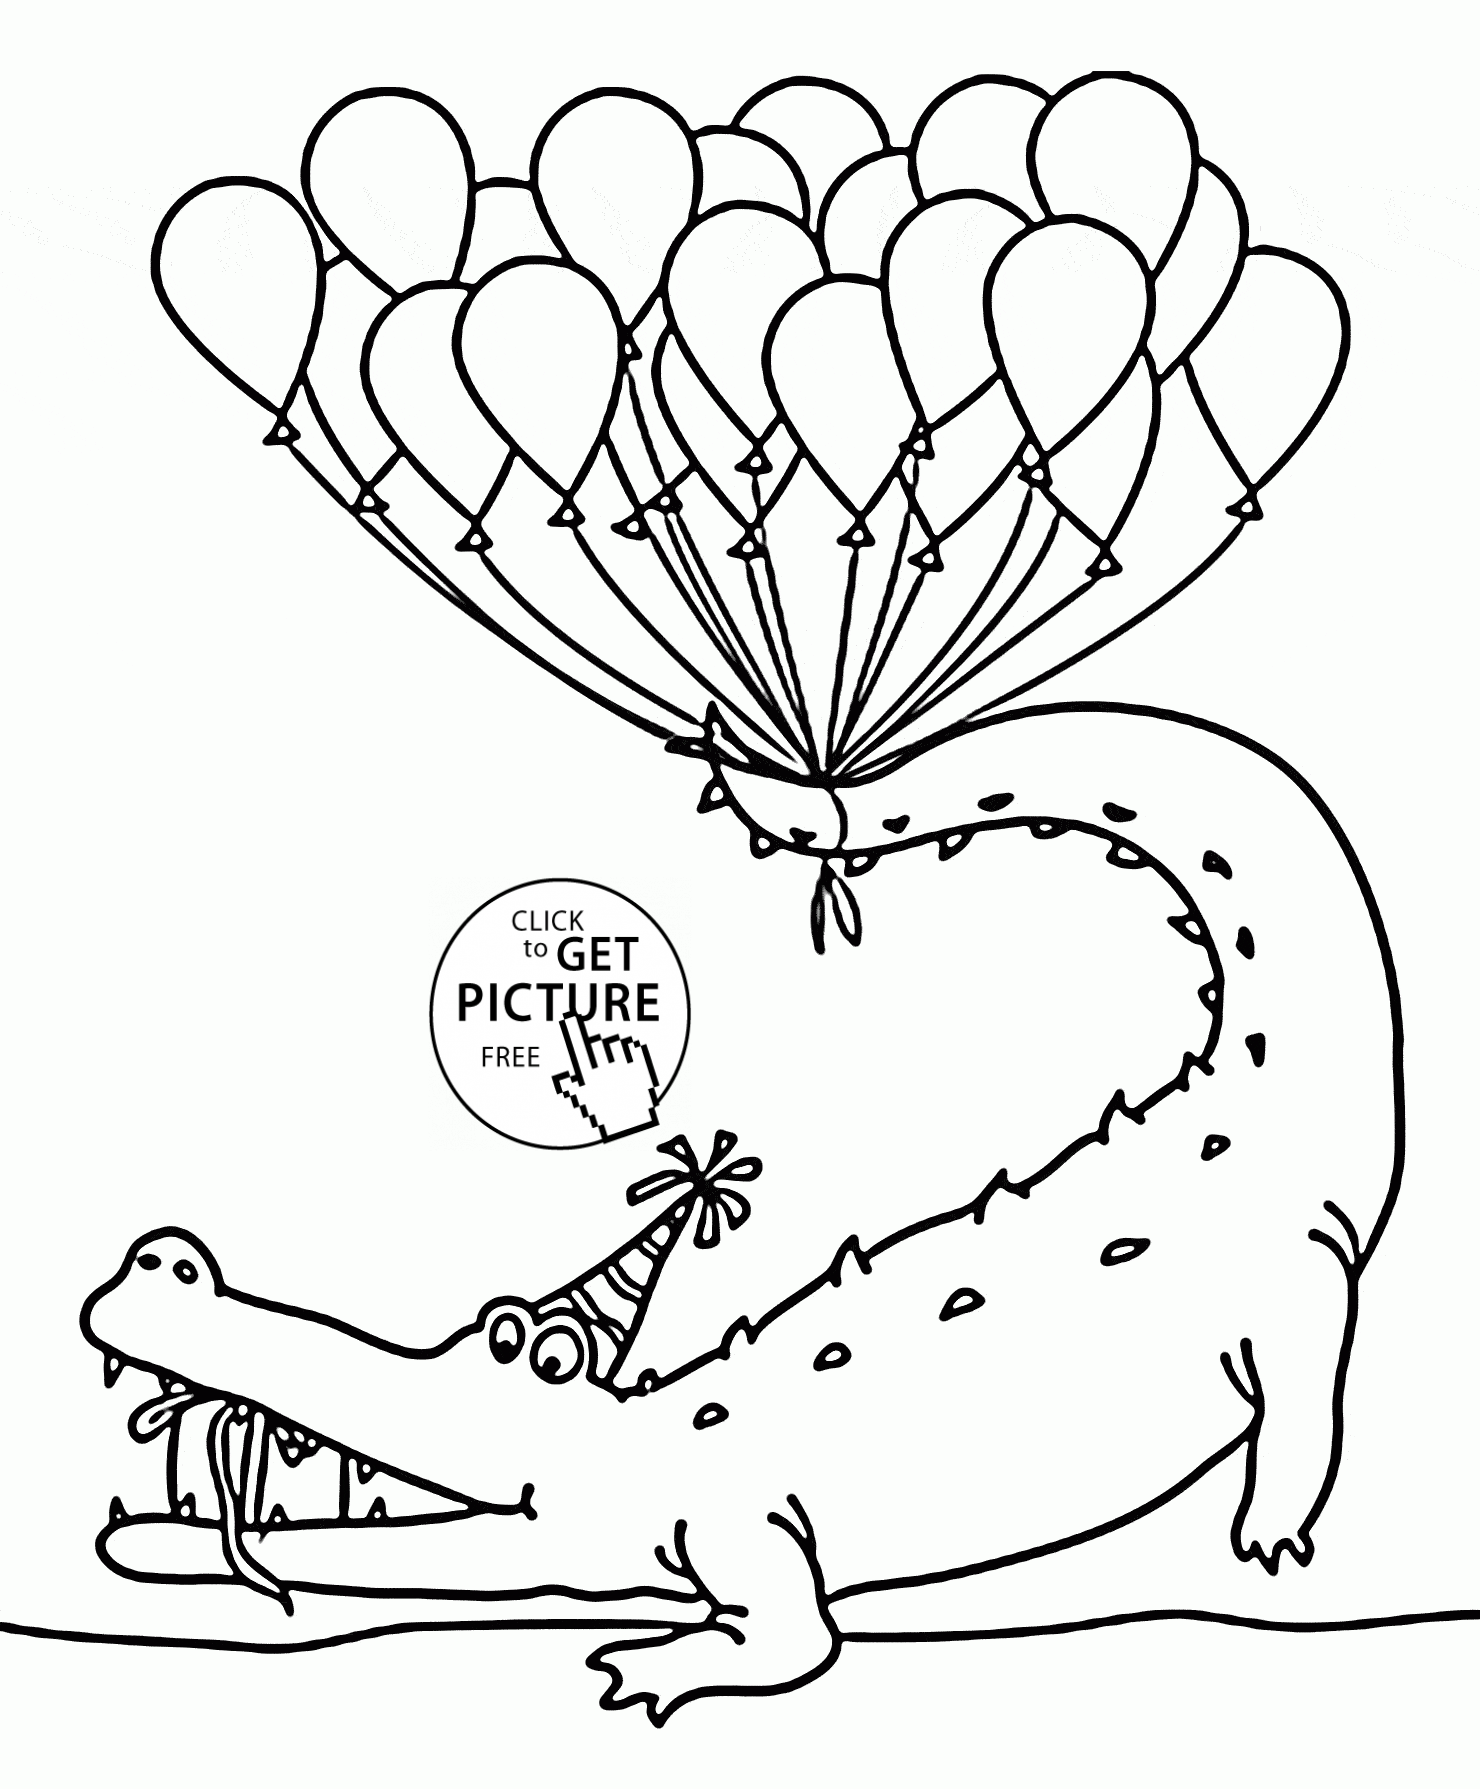 Alligator and Birthday Balloons coloring page for kids, holiday ...